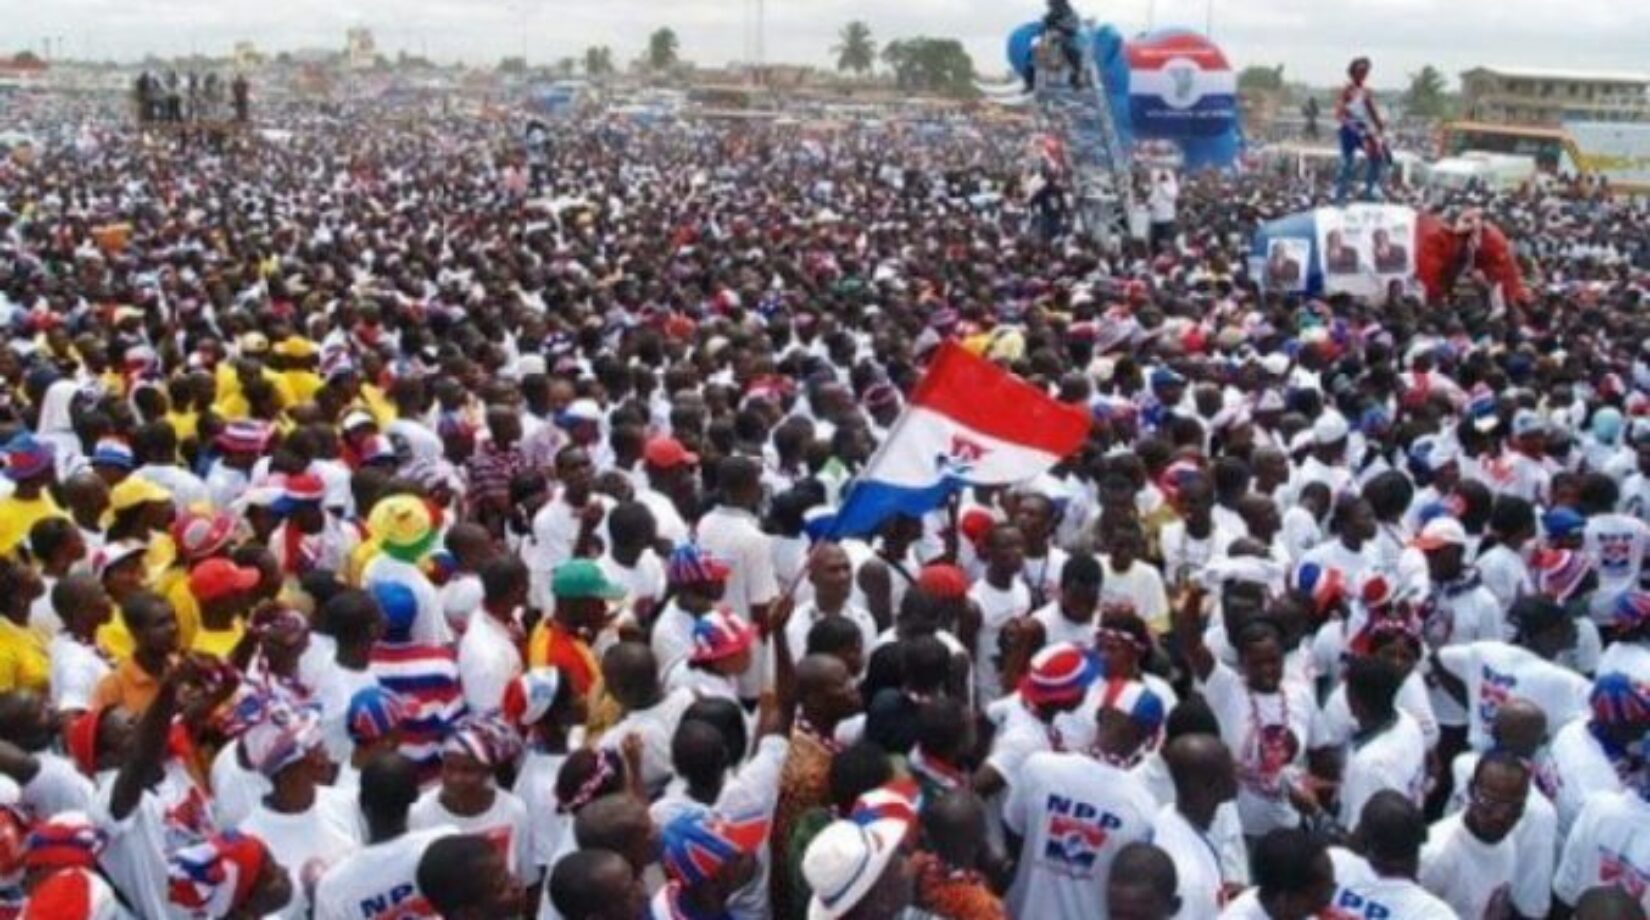 UPDATE ON NPP NAT’L DELEGATES CONFERENCE AND RELATED MATTERS